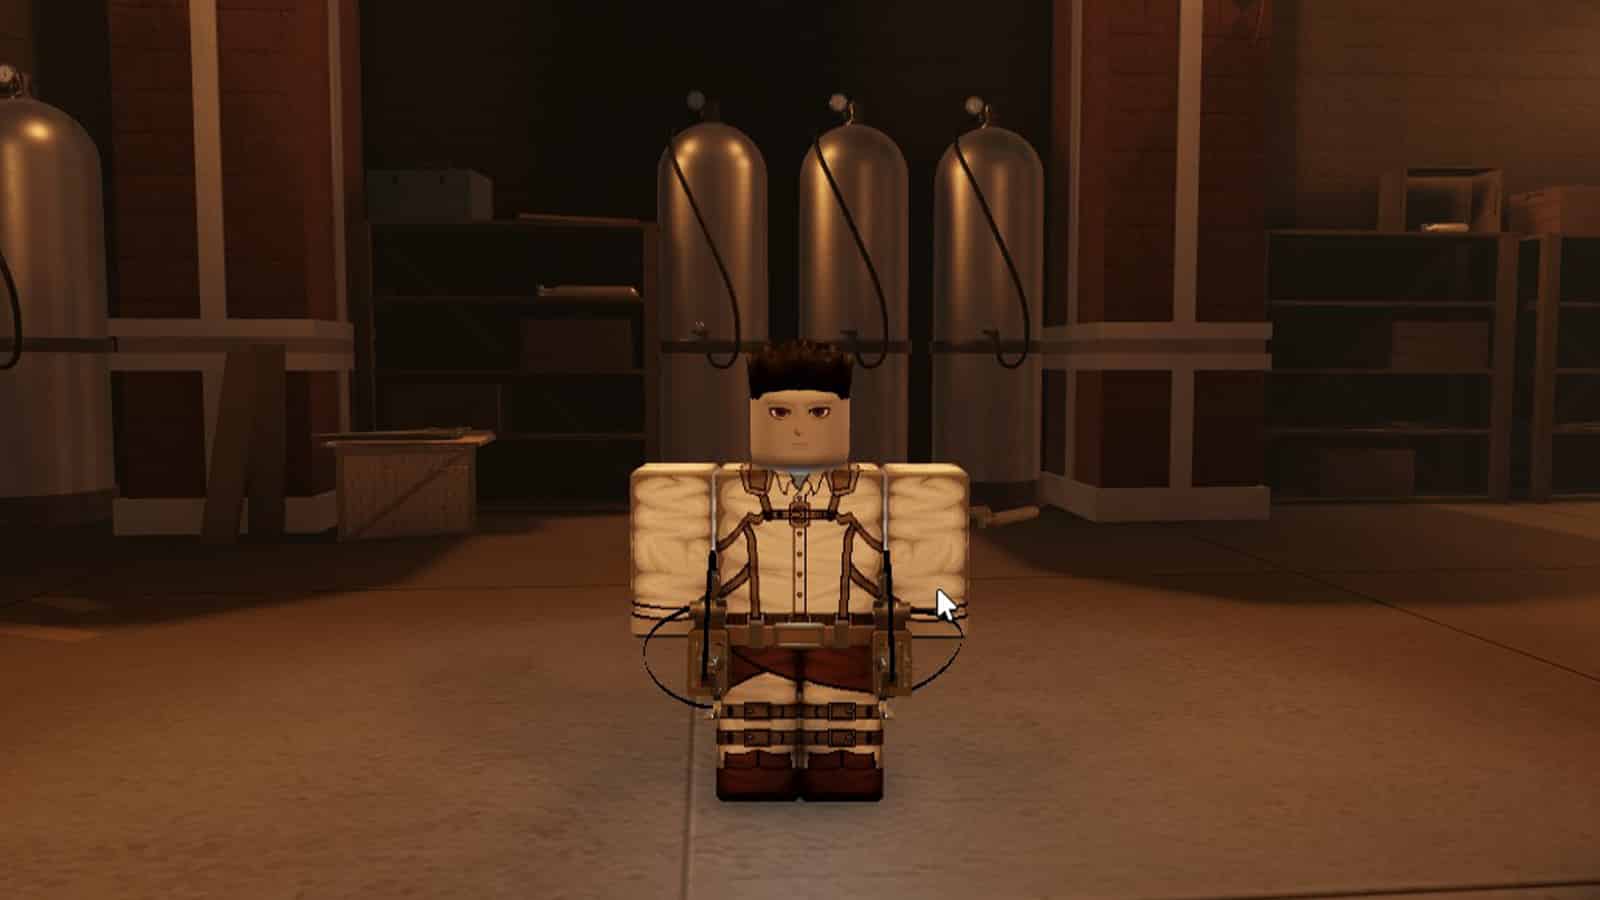 An image of a character from Titanage in Roblox